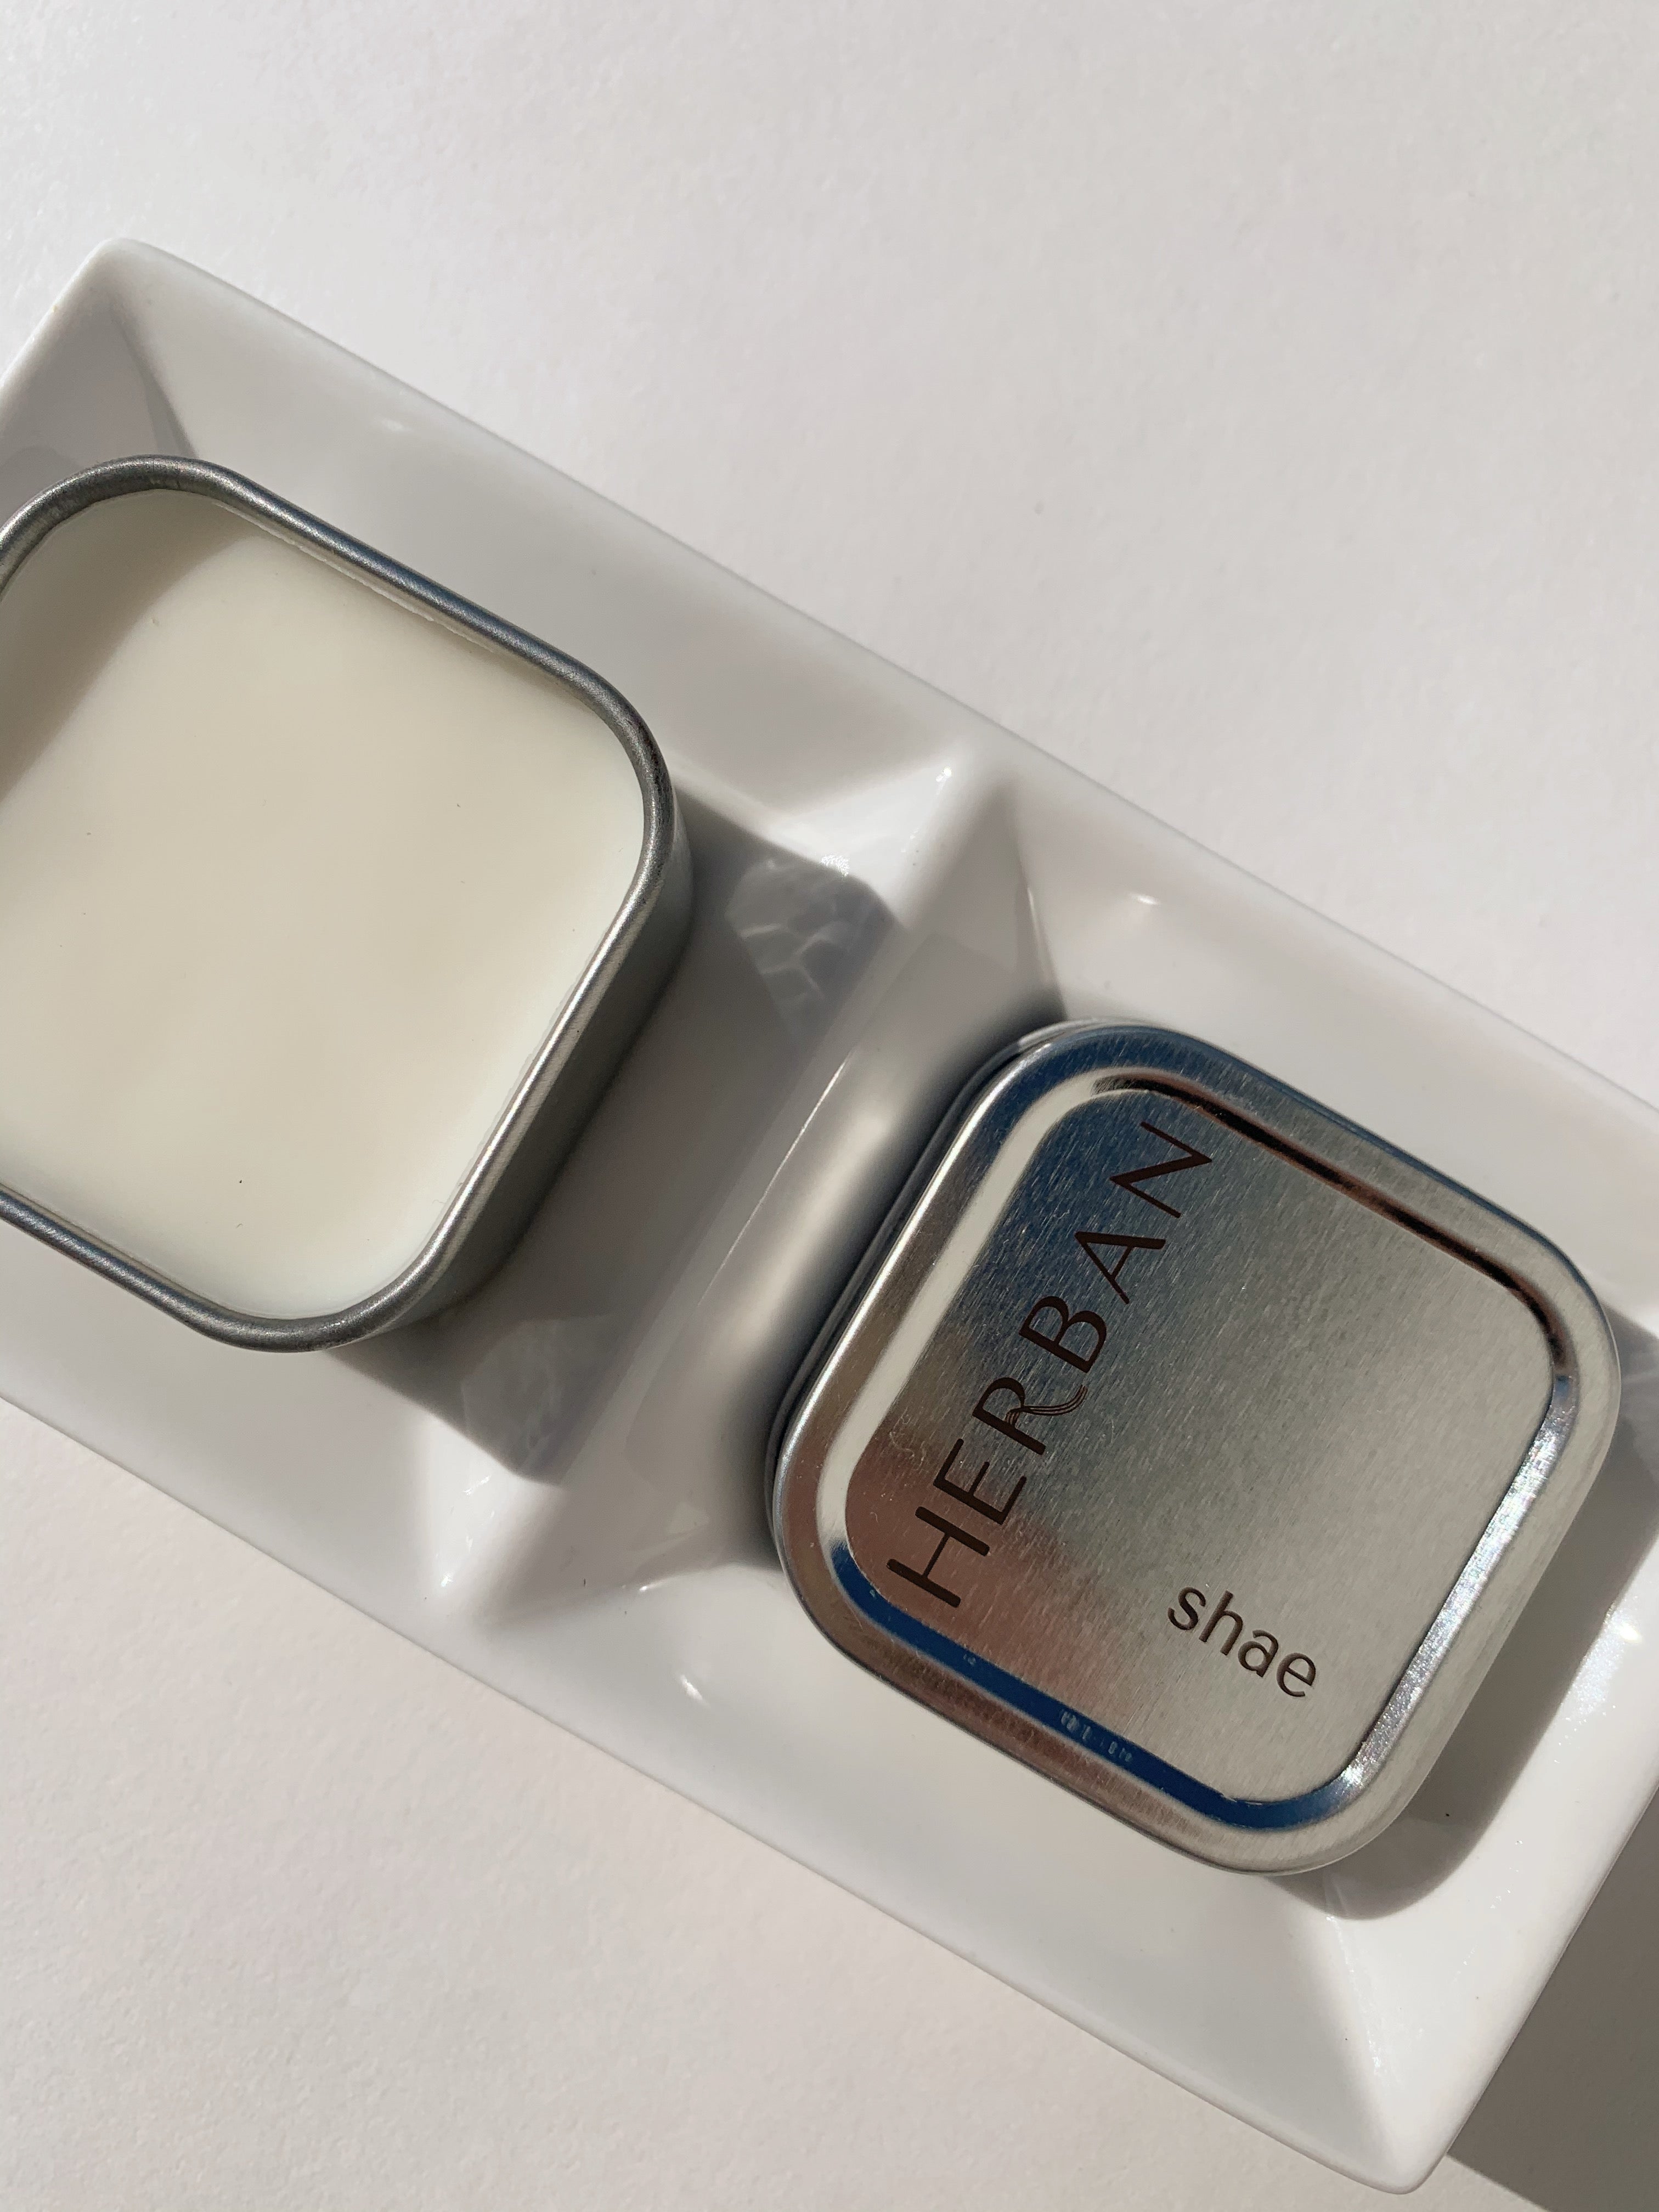 Herban Body Care's shea butter balm in a square silver tin with the lid off and showing the solid cream colored moisturizer